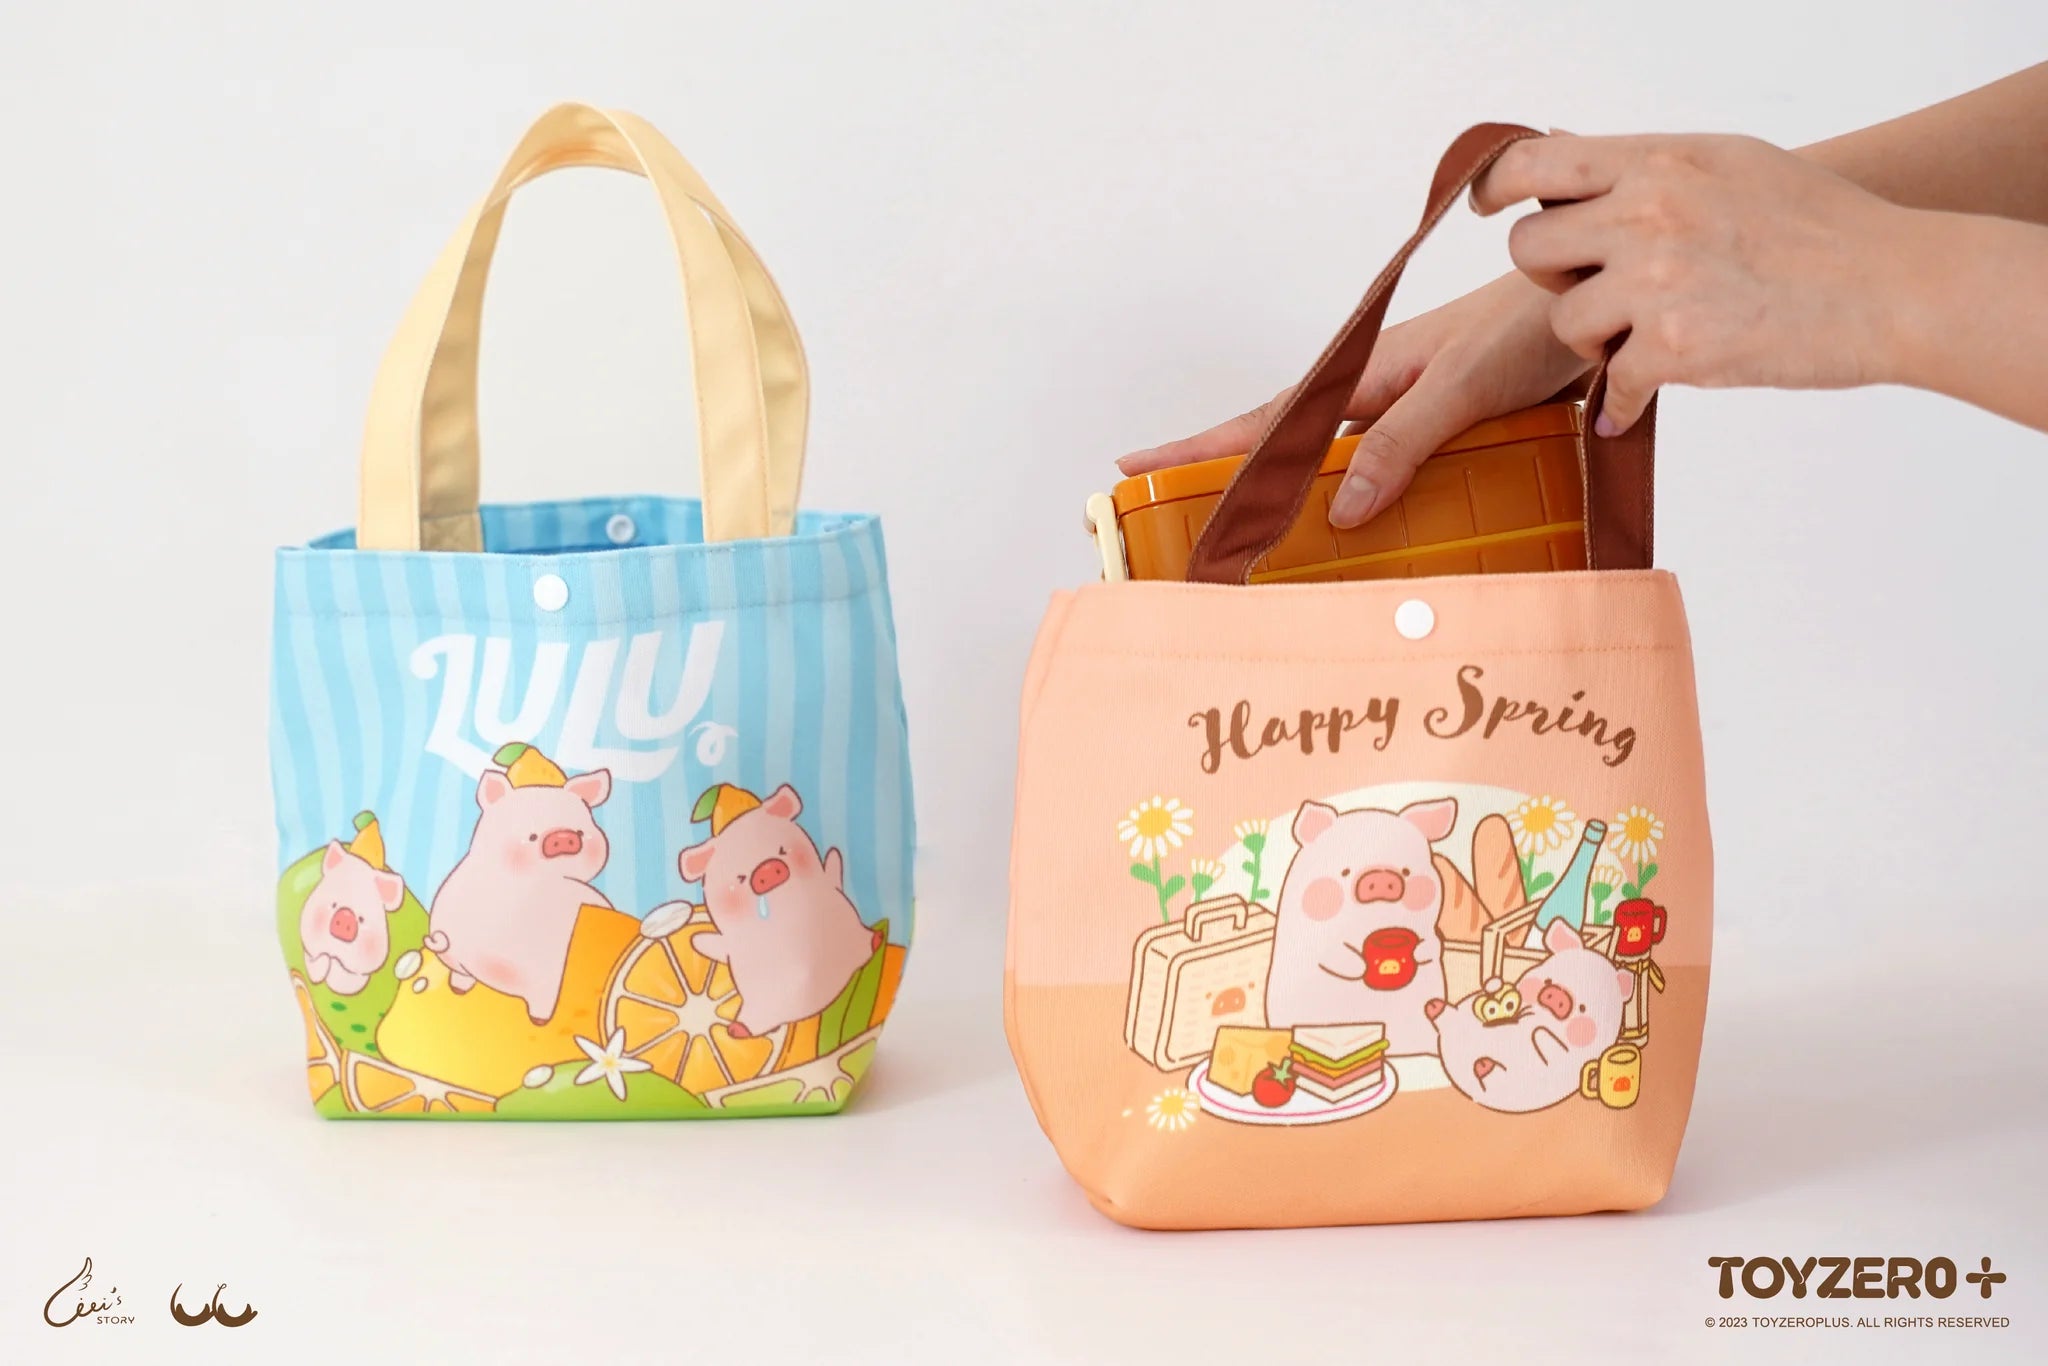 A hand holding LULU THE PIGGY lunch bag with cartoon pig design and a bottle of honey, flower detail visible.